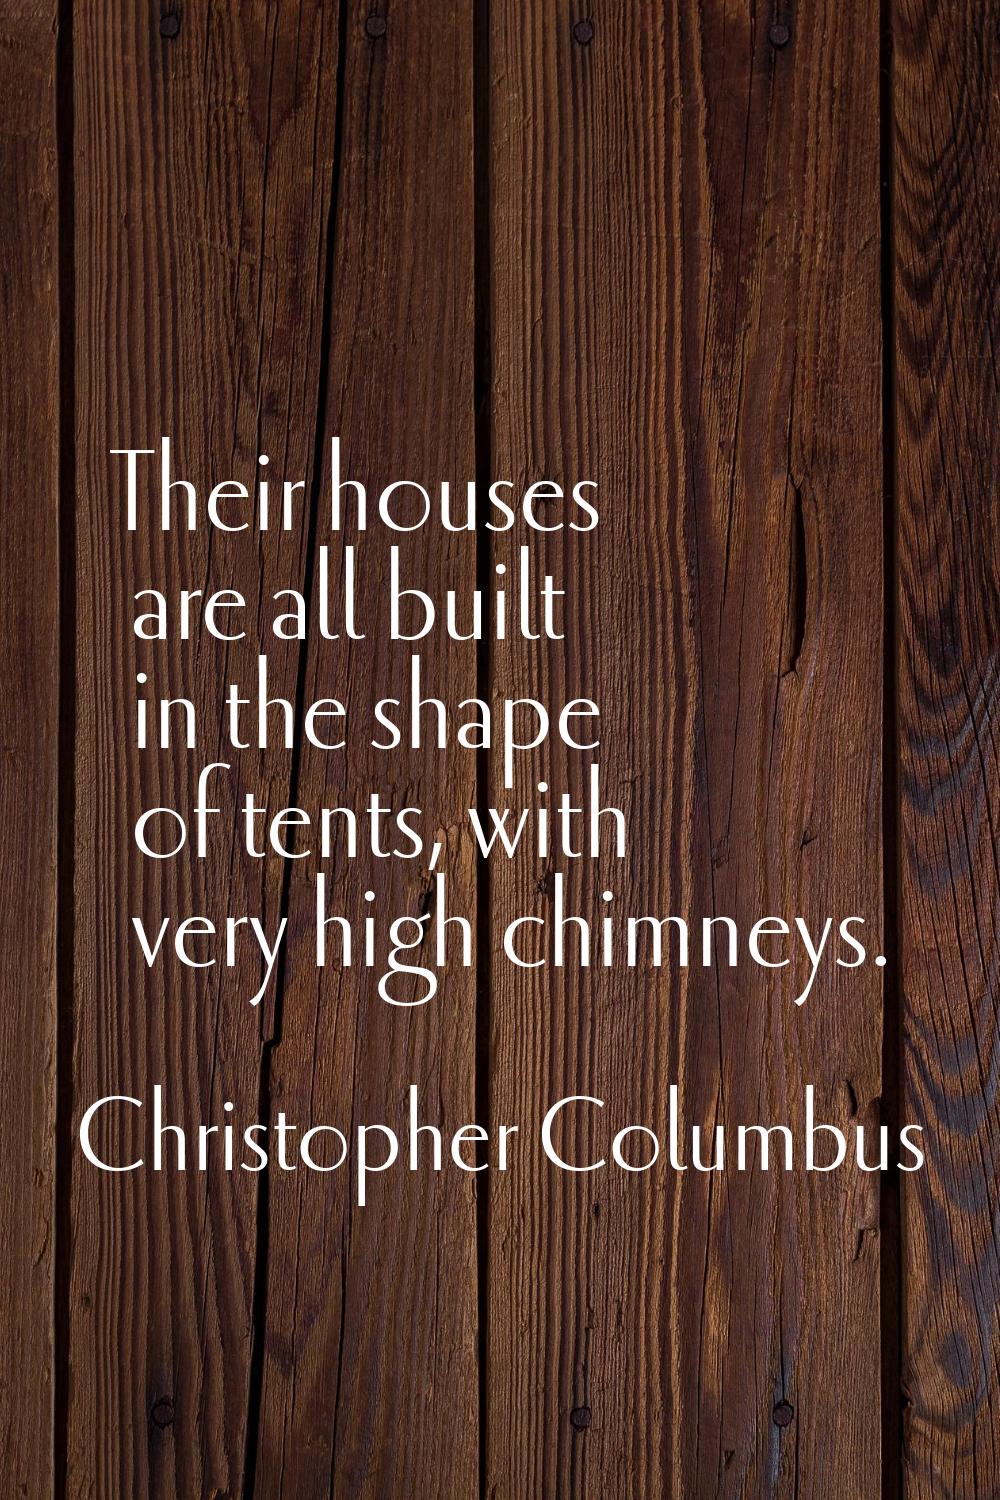 Their houses are all built in the shape of tents, with very high chimneys.